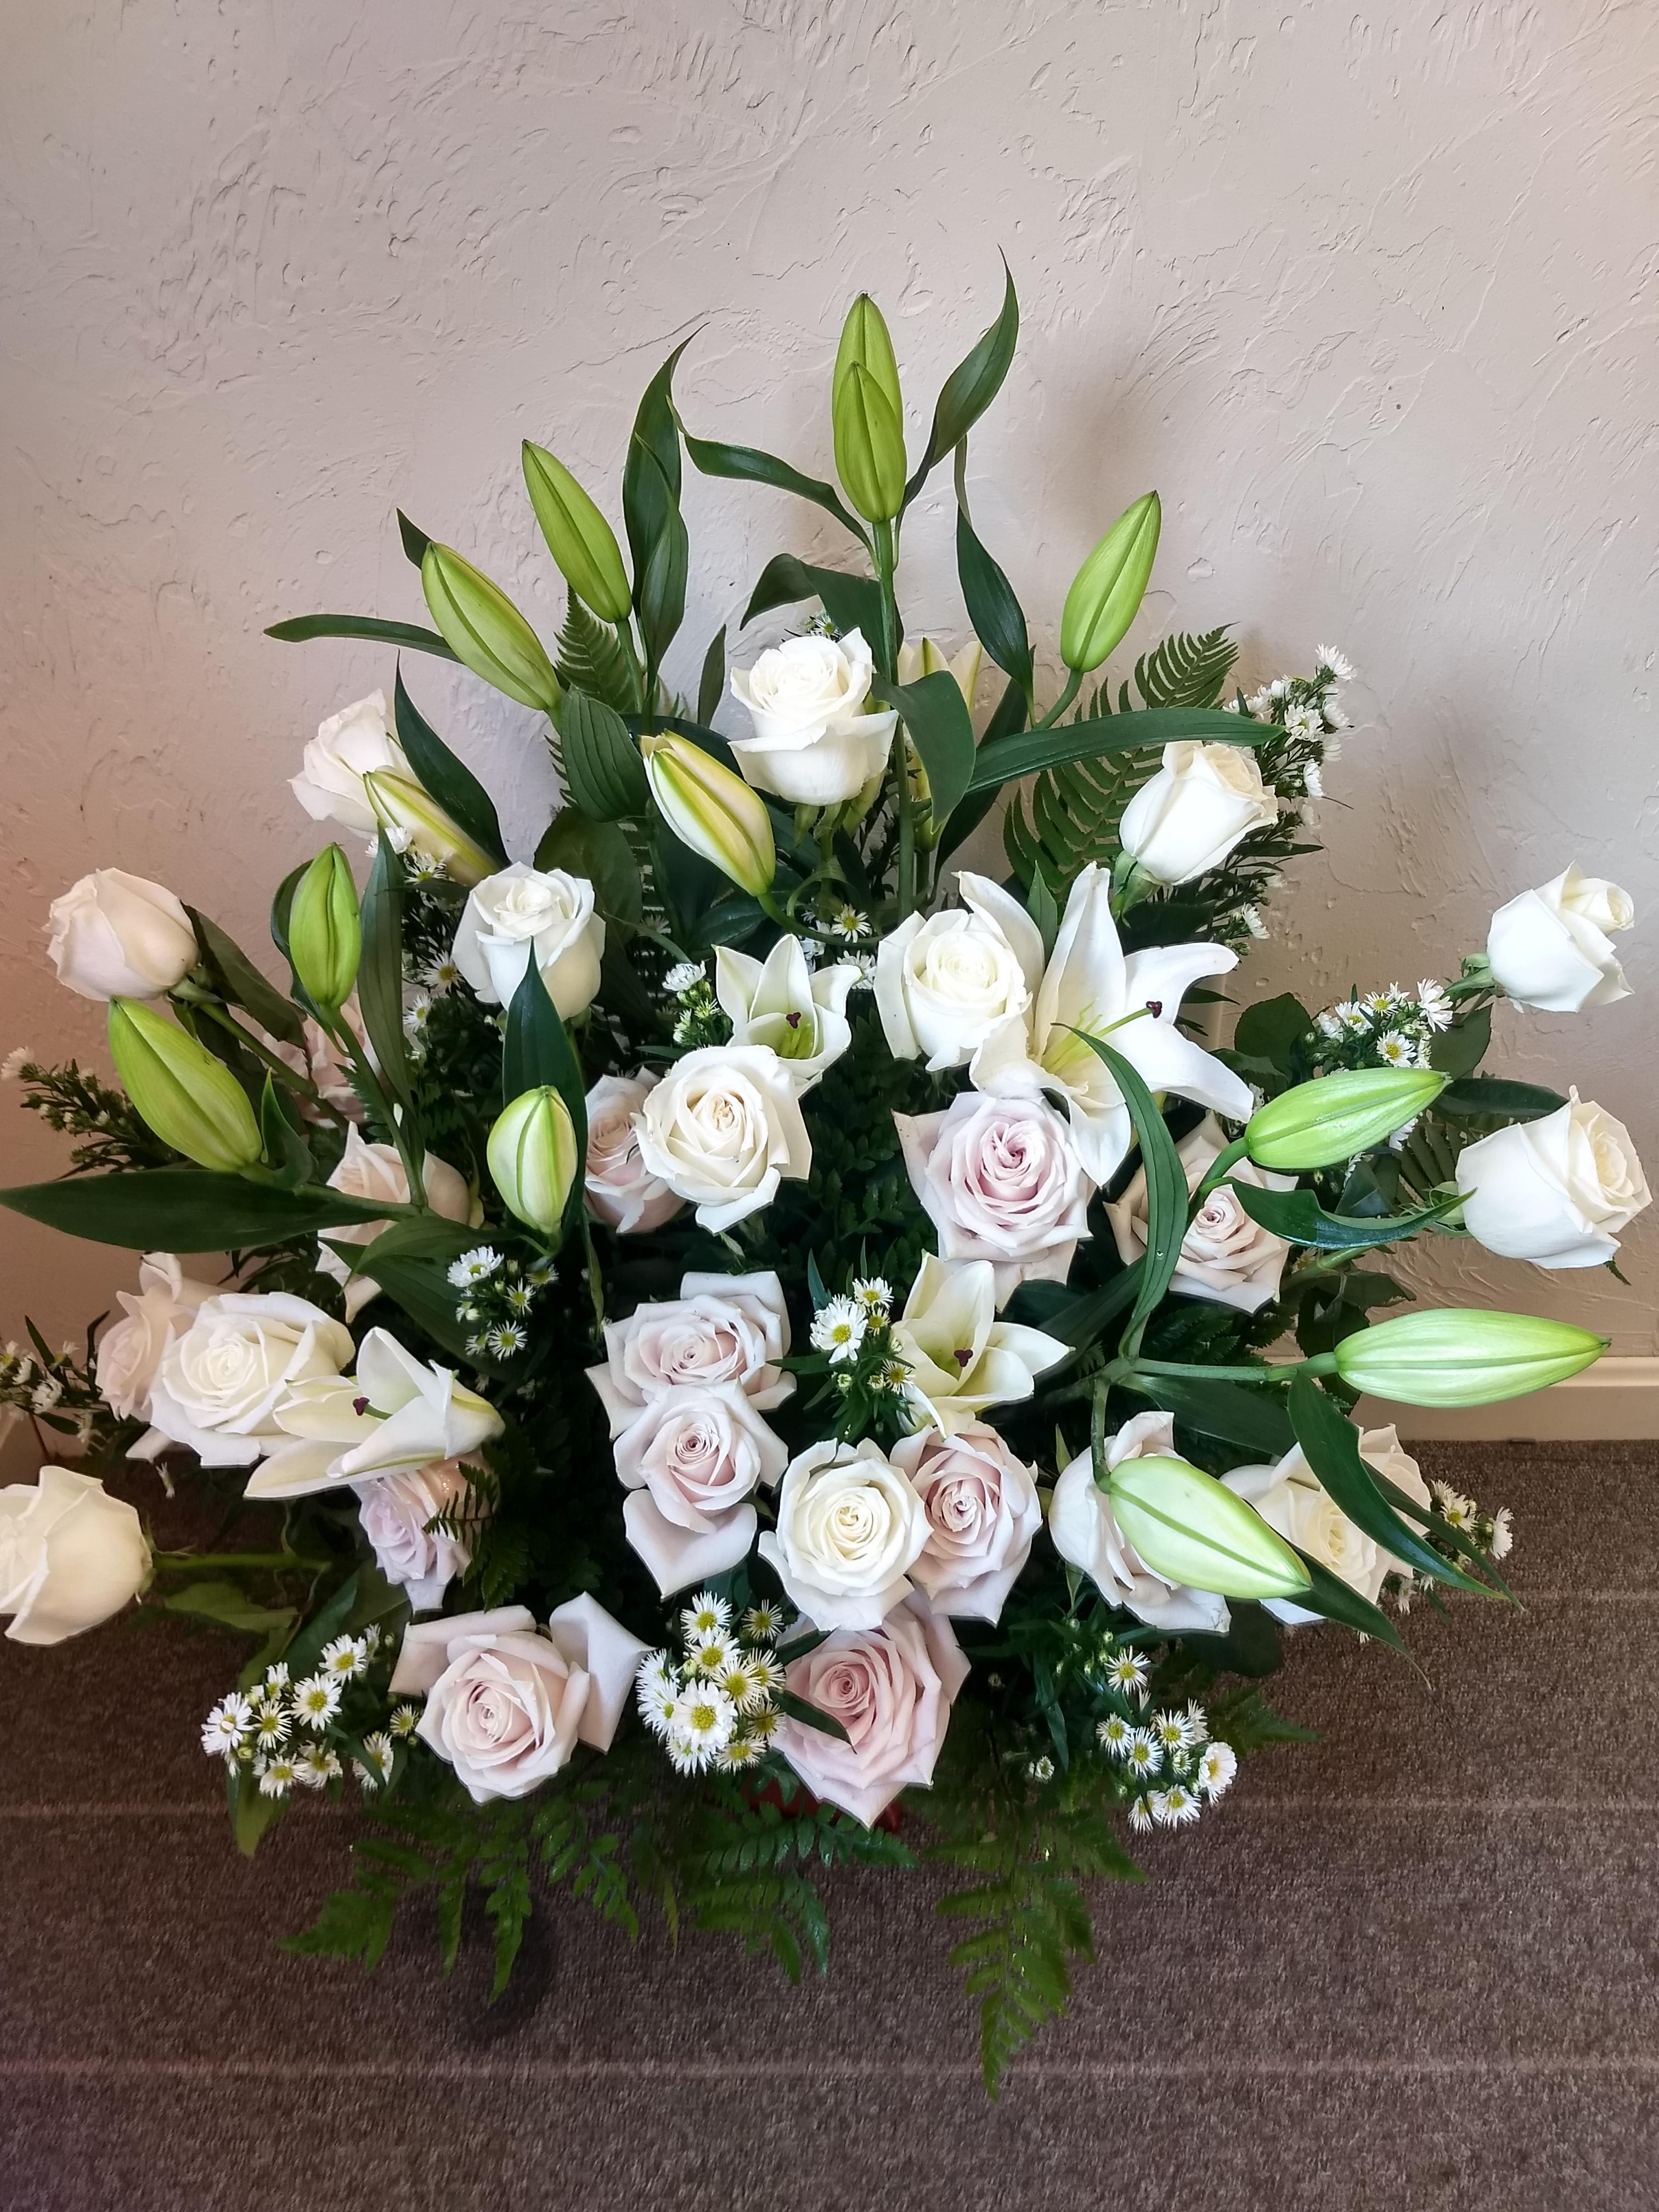  Loving Lilies and Roses Bouquet #T216-1A - A simply beautiful way to show you care. By sending this elegant arrangement to the home of those in mourning, you are letting them know they are embraced in your thoughts. And in your heart.  **** Please note: 48 hour notice MAYBE REQUIRED We custom-design this arrangement using best-of-day seasonal flowers. This image is a general representation of its size and style and may not feature the exact flowers shown. Due to disruptions in the global supply chain and staff shortages, we may have to make last minute substitutions to your selected design. If we need to make significant changes we will call you first to get your approval*** Thank you for understanding.